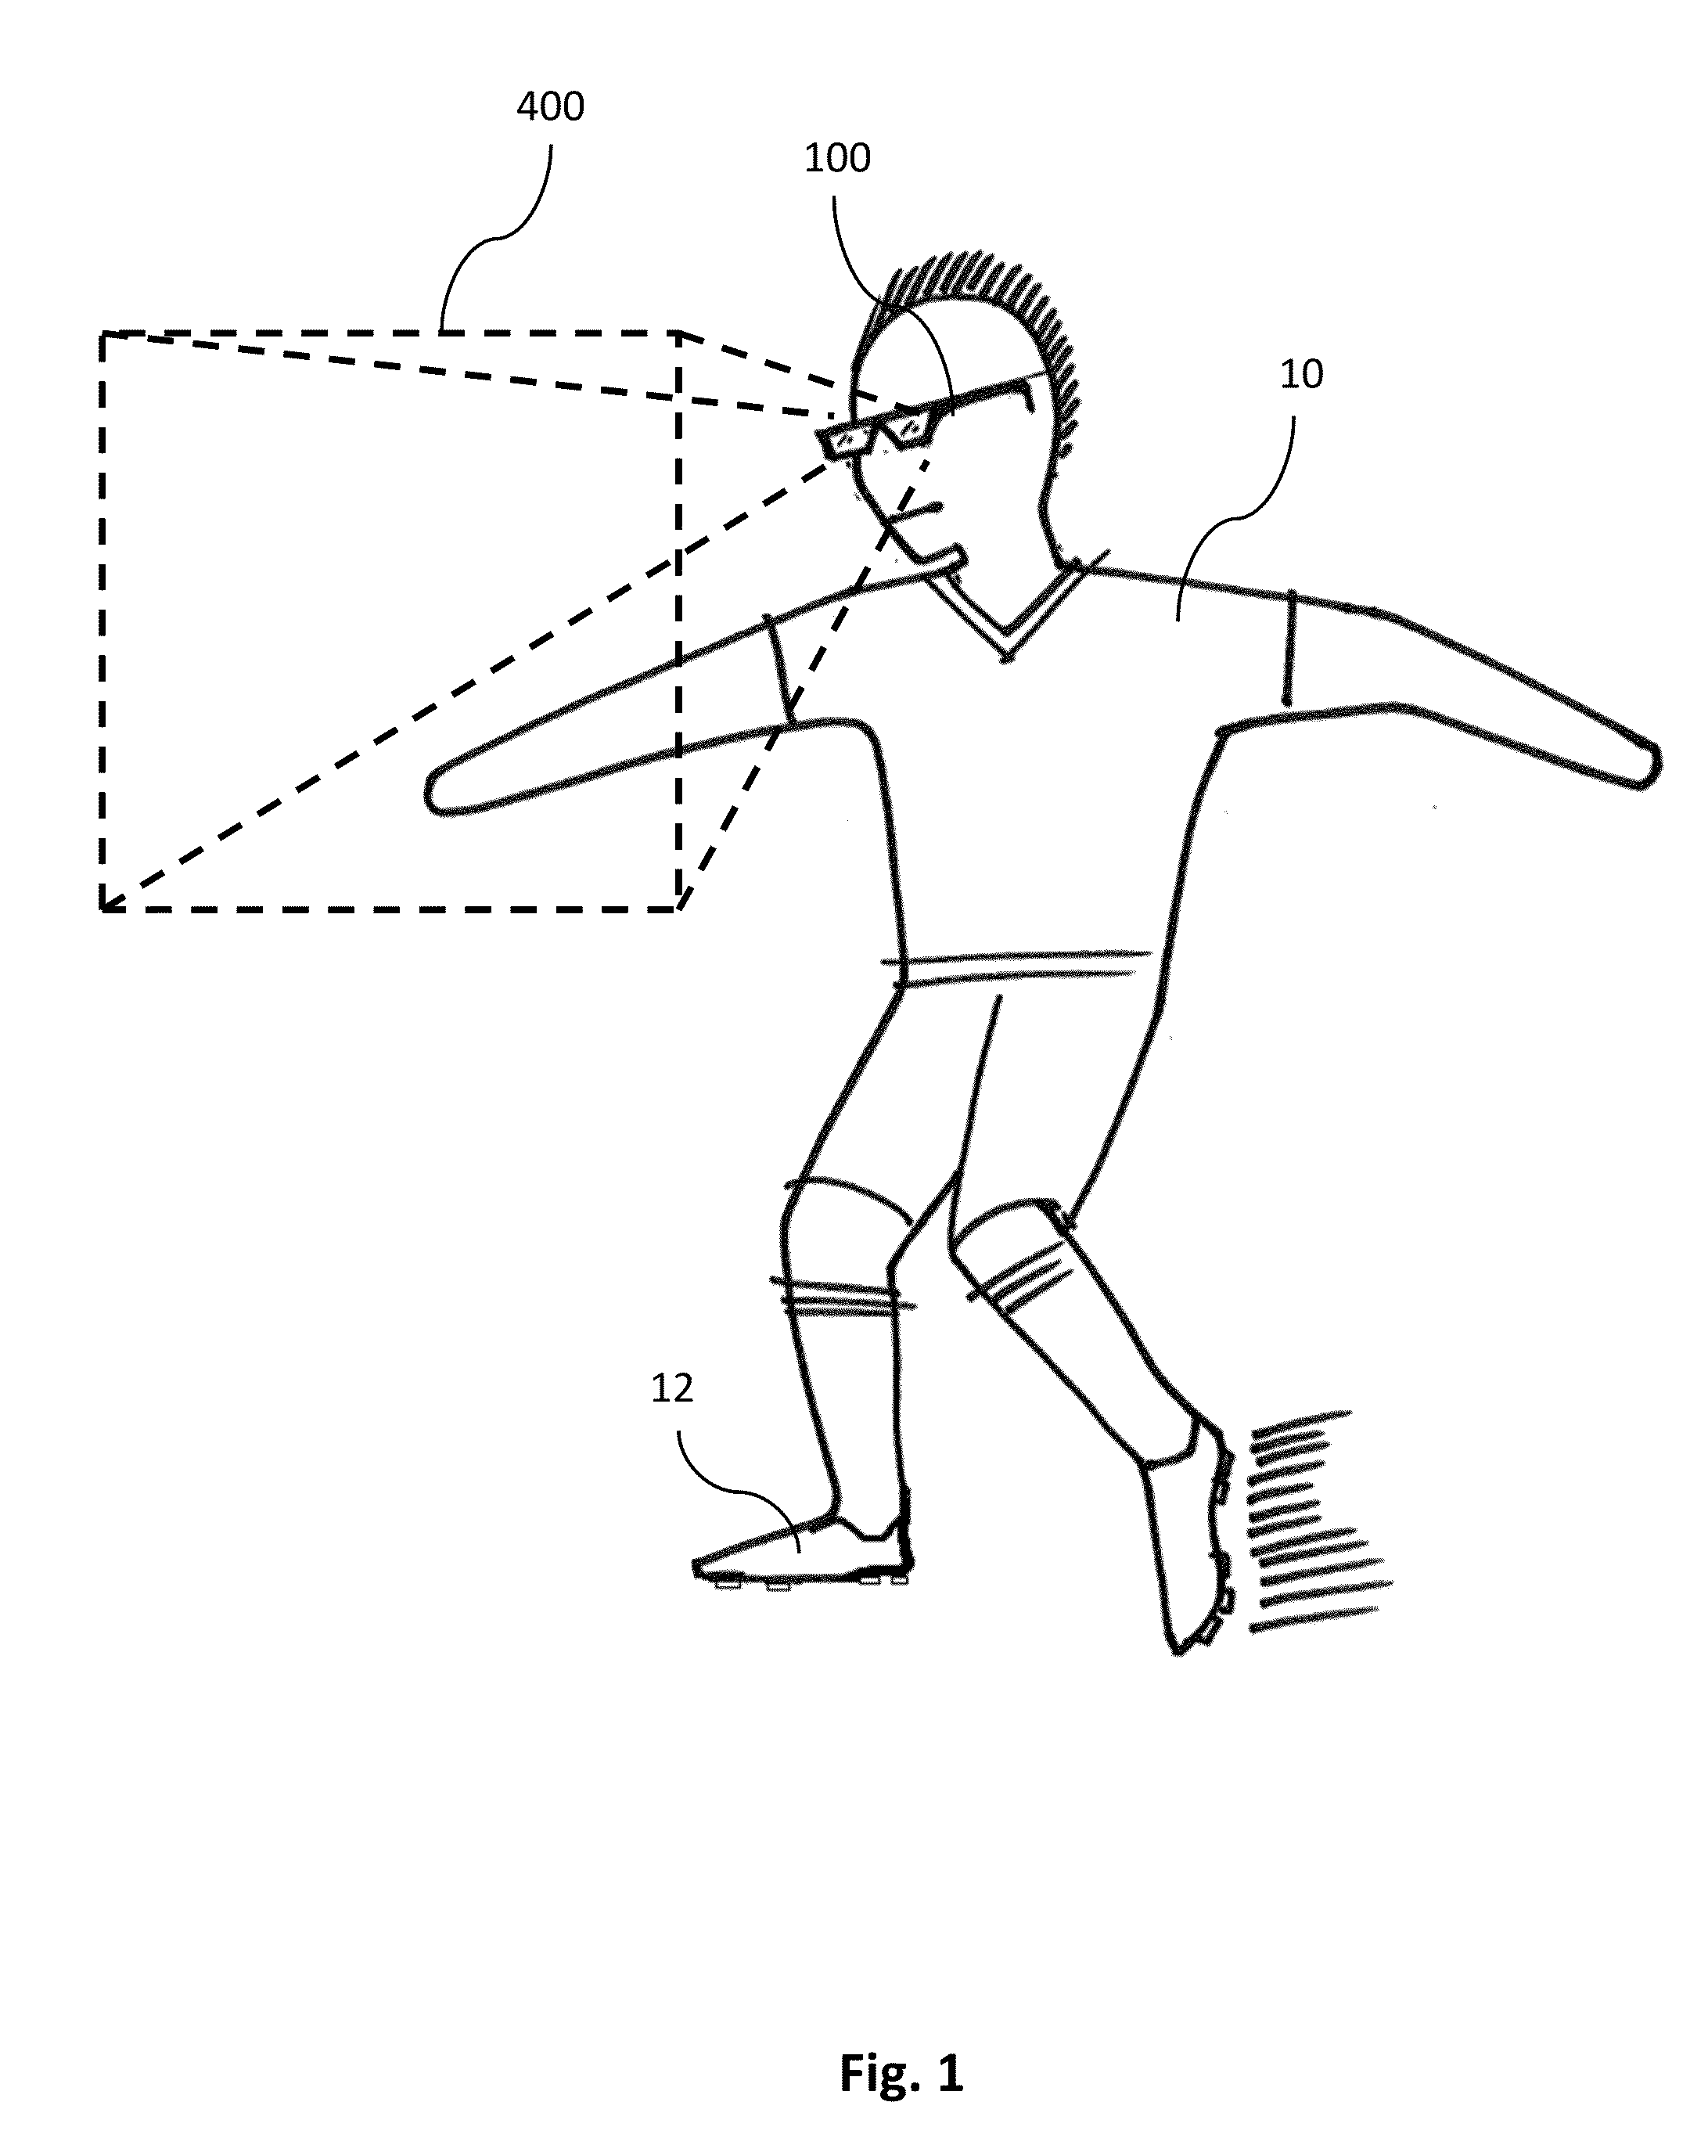 Athletic Activity Heads Up Display Systems and Methods